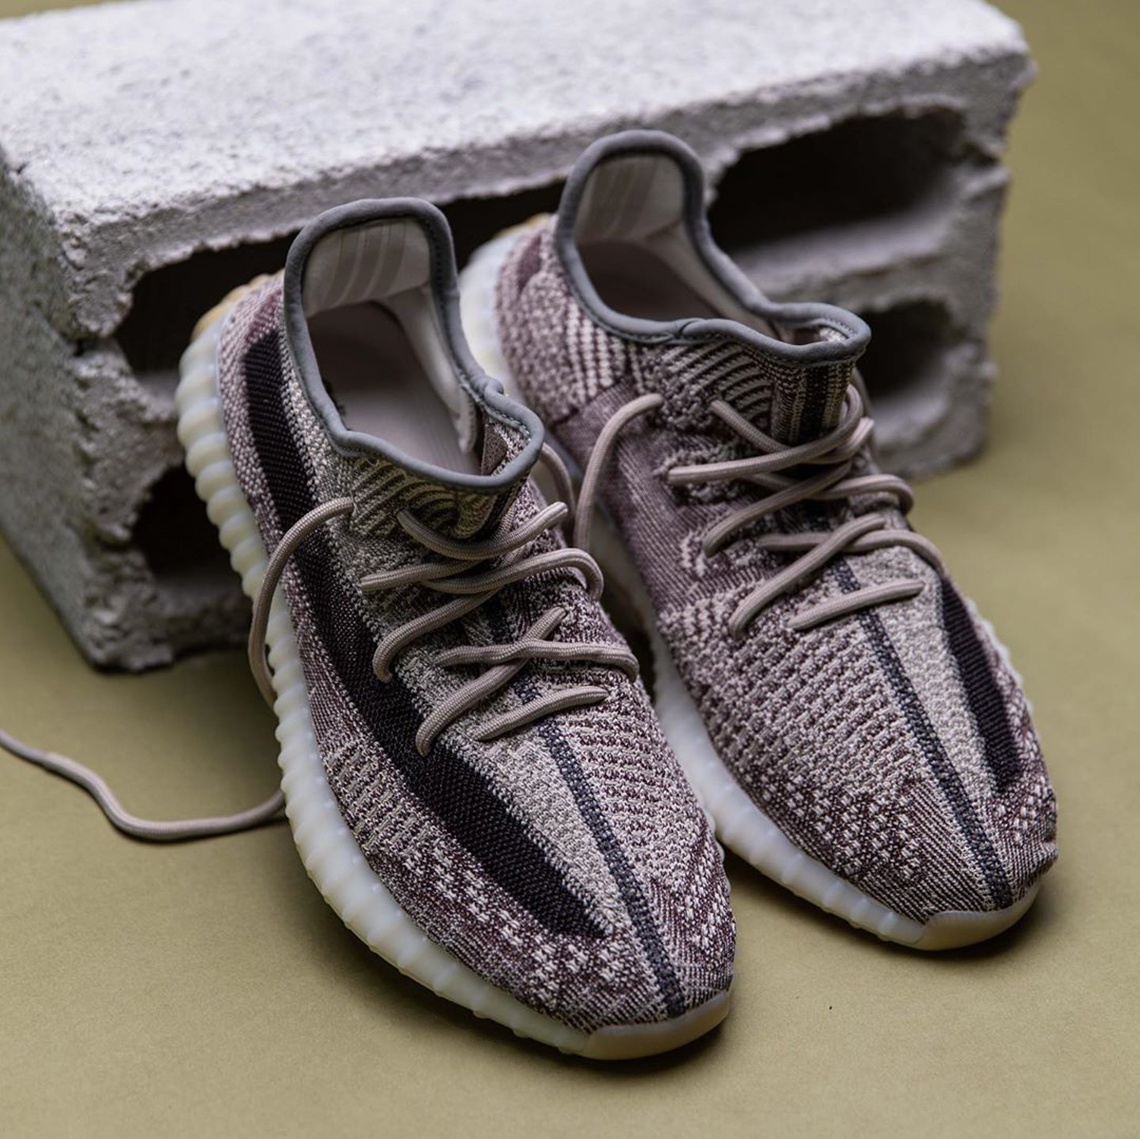 Adidas Yeezy Boost 350 V2 Zyon May Release 3